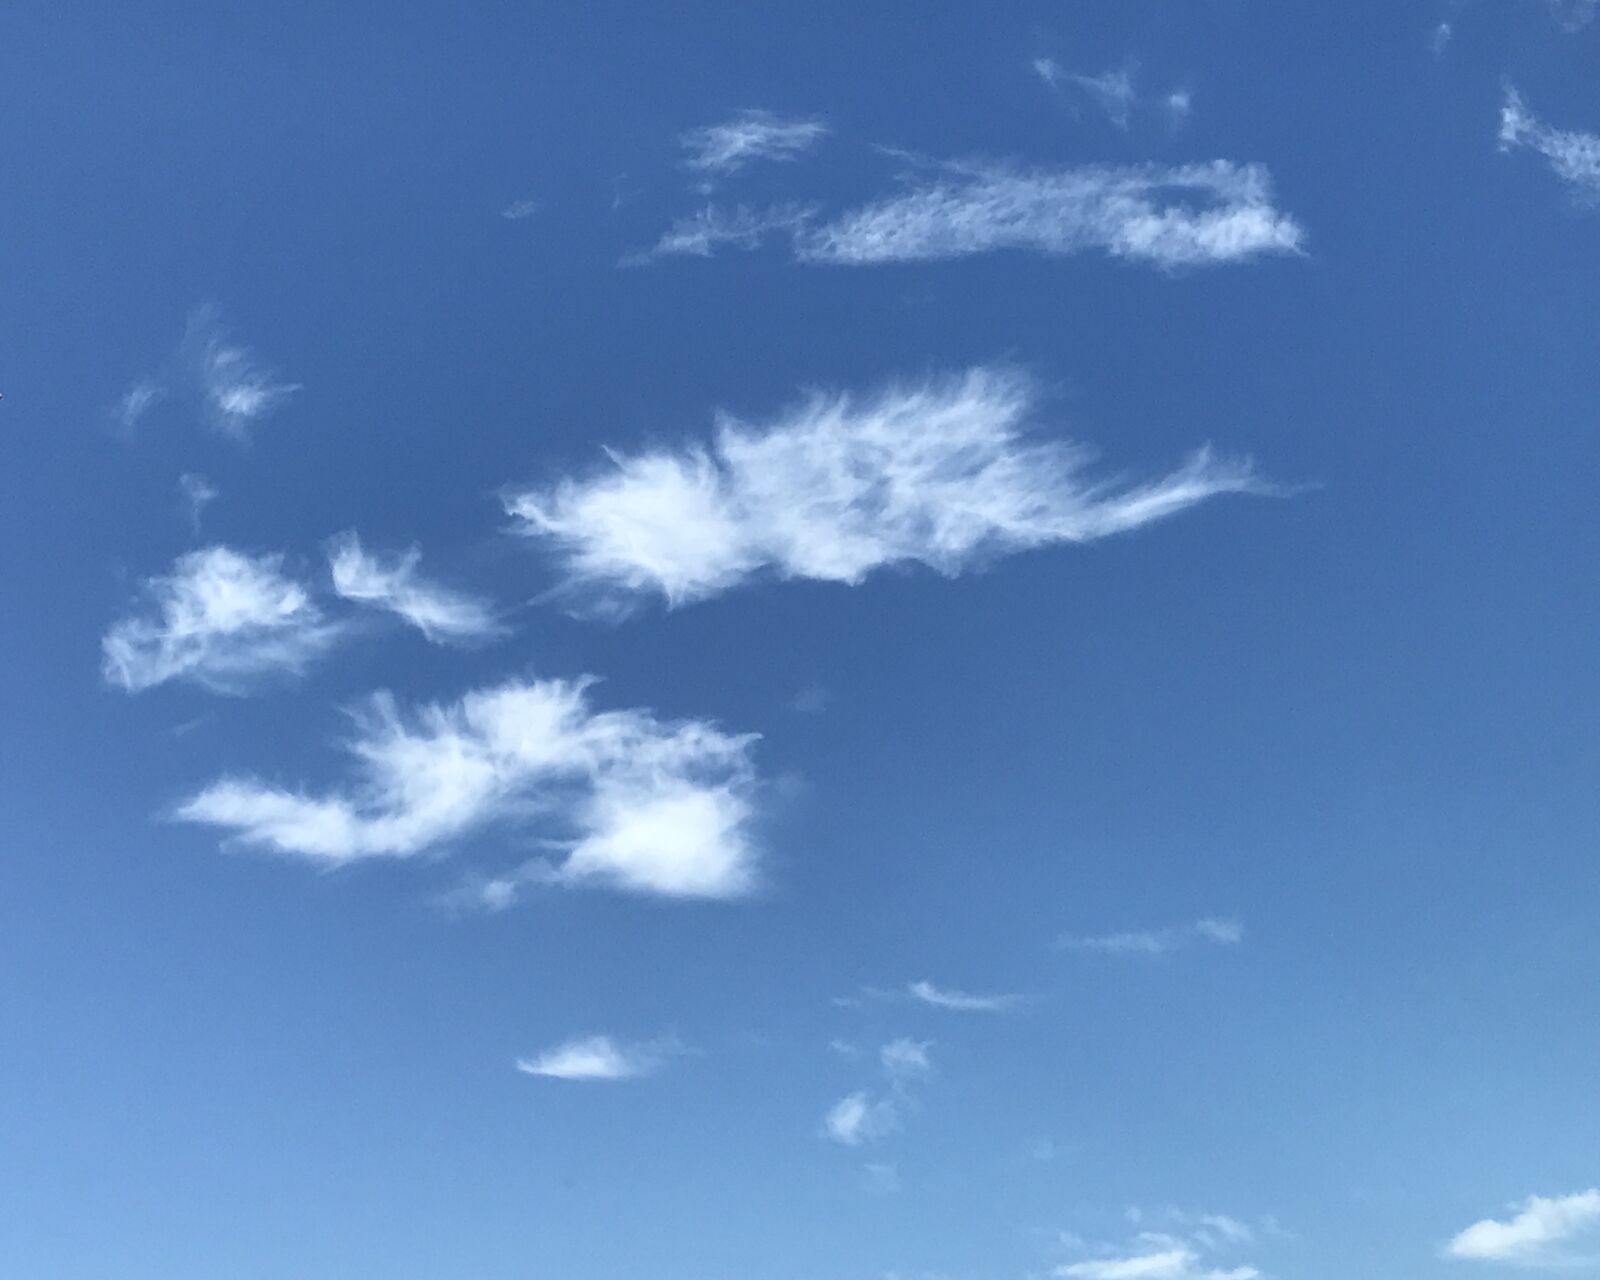 Apple iPhone 7 sample photo. Sky, clouds, cirrus clouds photography